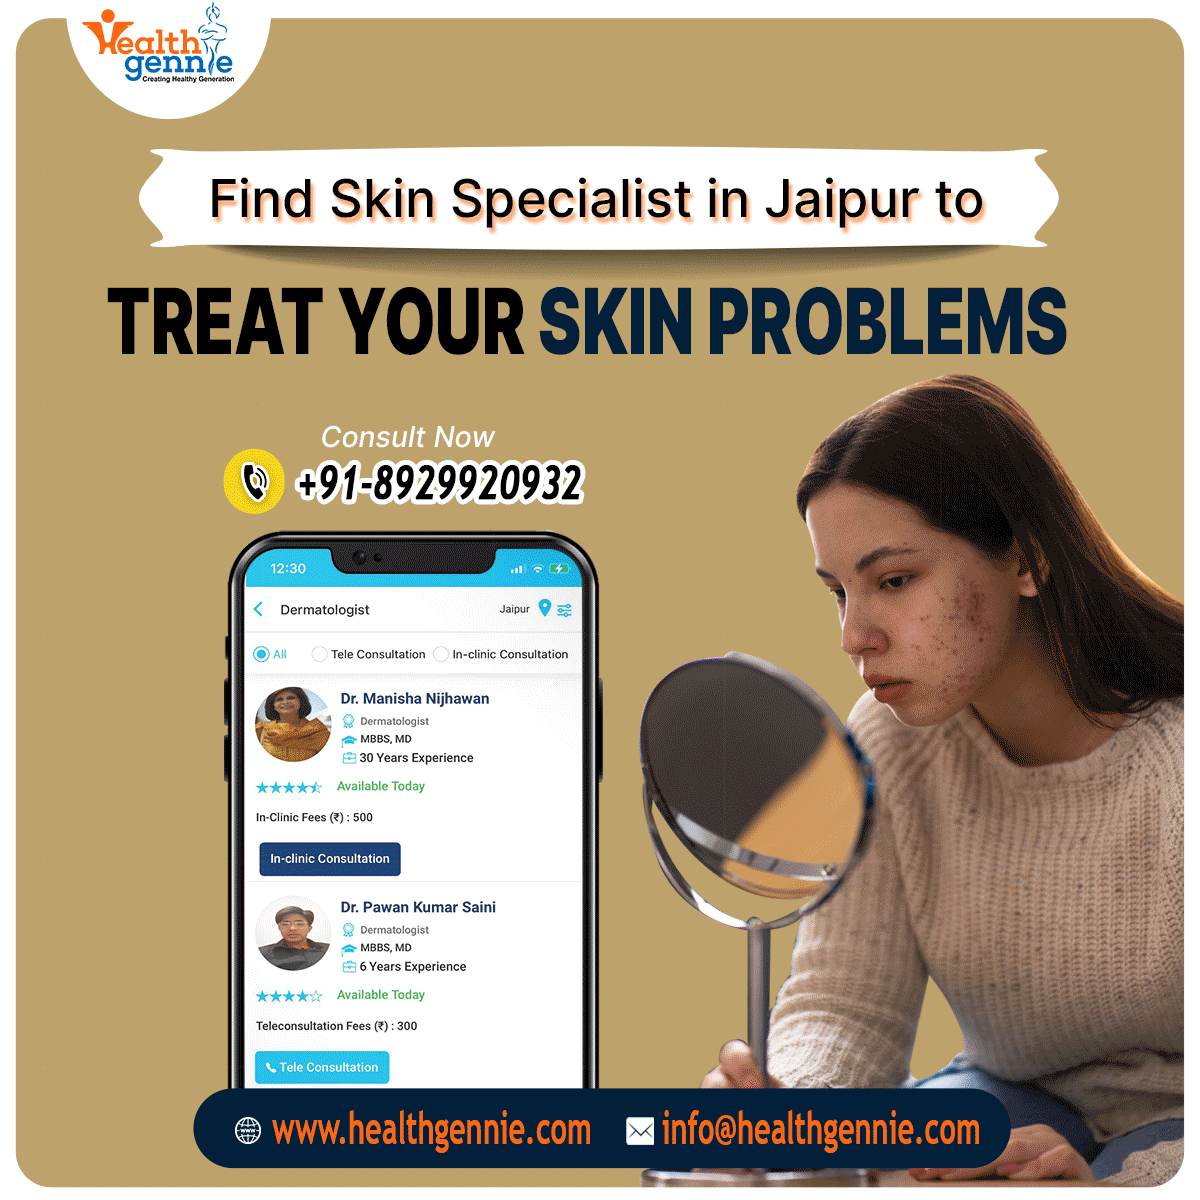 Find Skin Specialist in Jaipur to Treat Your Skin Problems dermatologist jaipur dermatologist near me skin doctor in jaipur skin specialist in jaipur